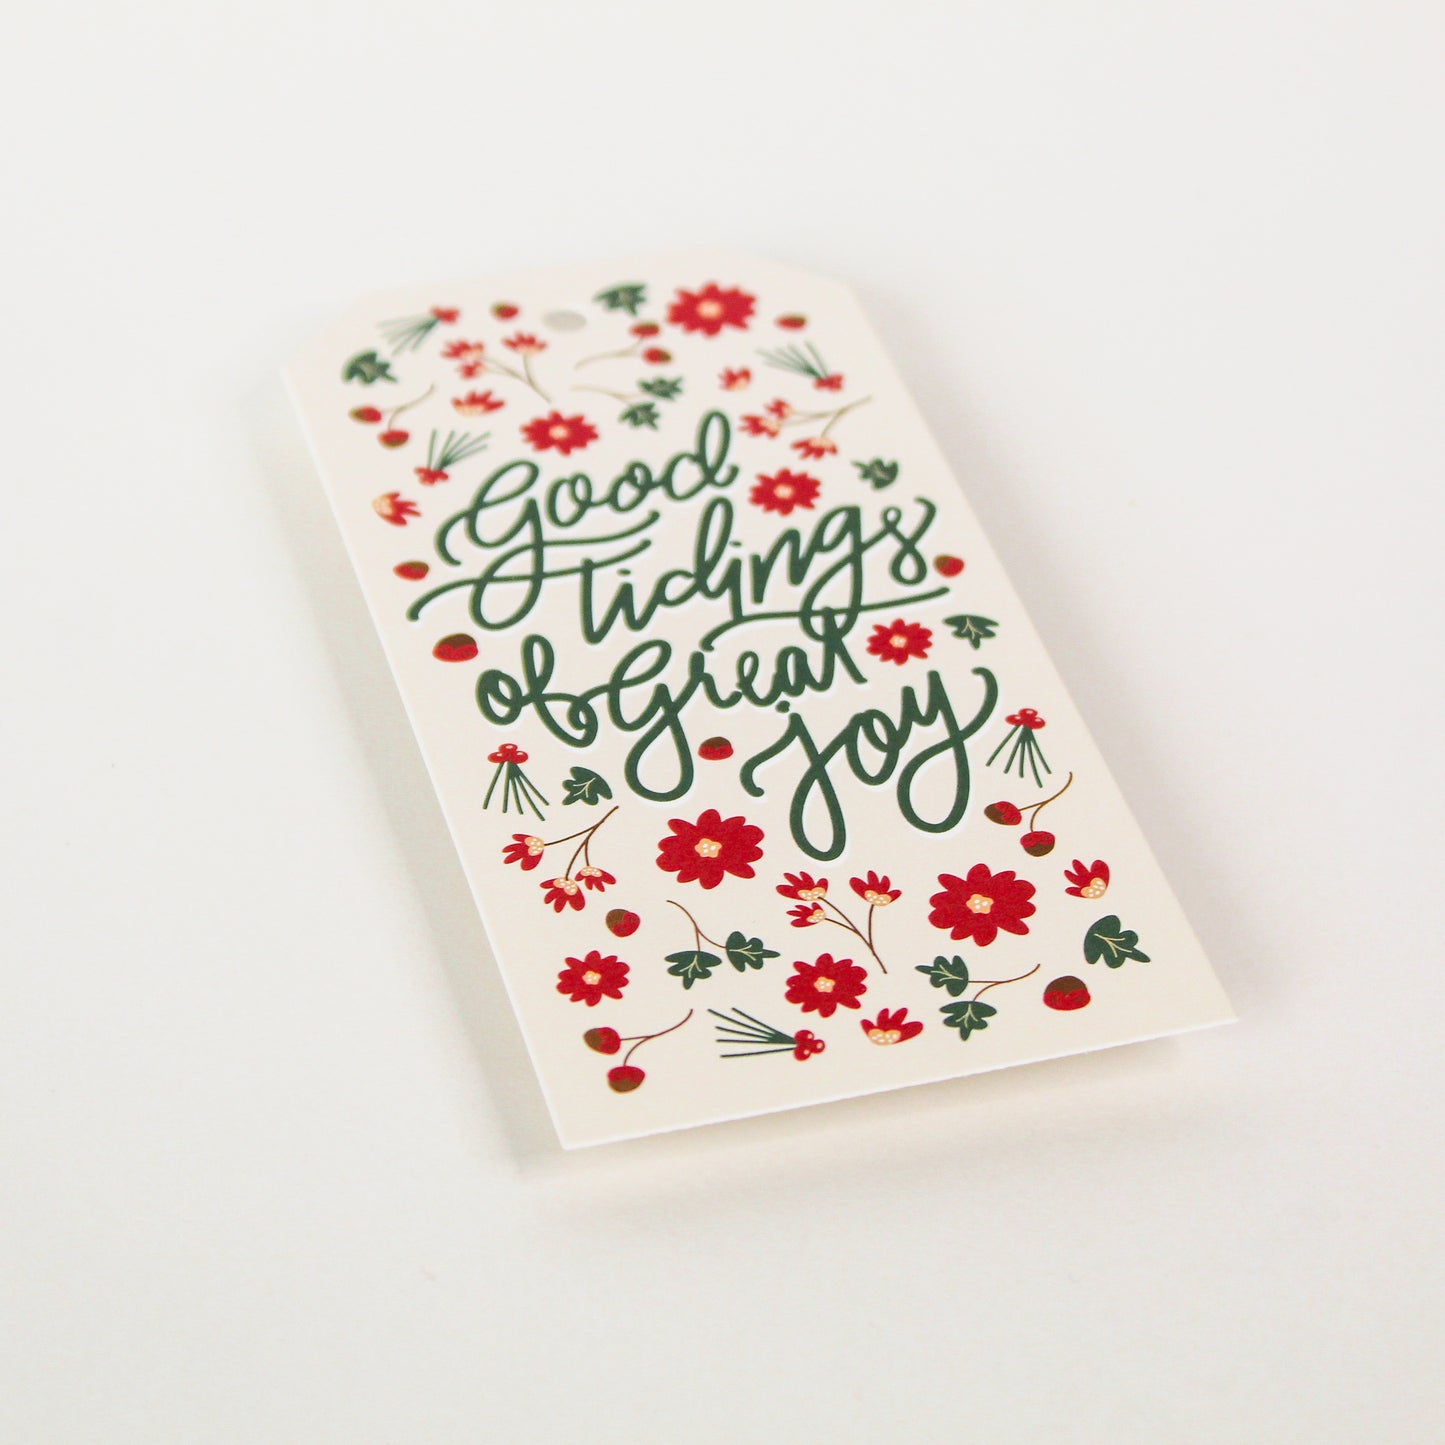 Good Tidings of Great Joy! Gift Tags